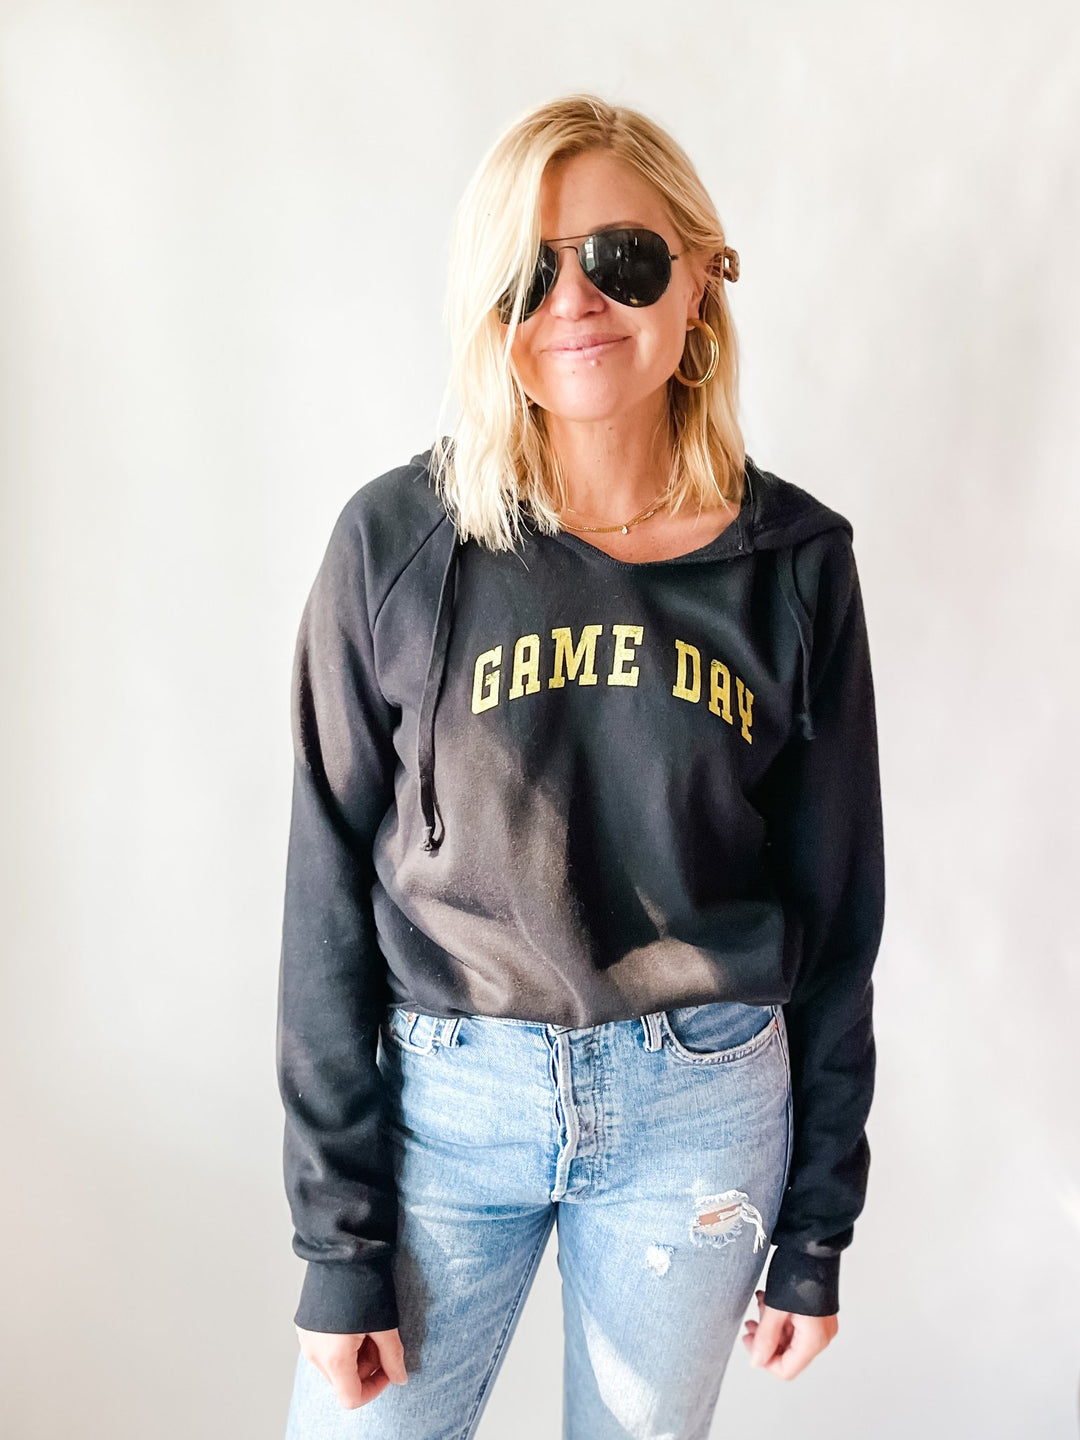 Boat House Apparel - Game Day Hoodie in Black/Yellow